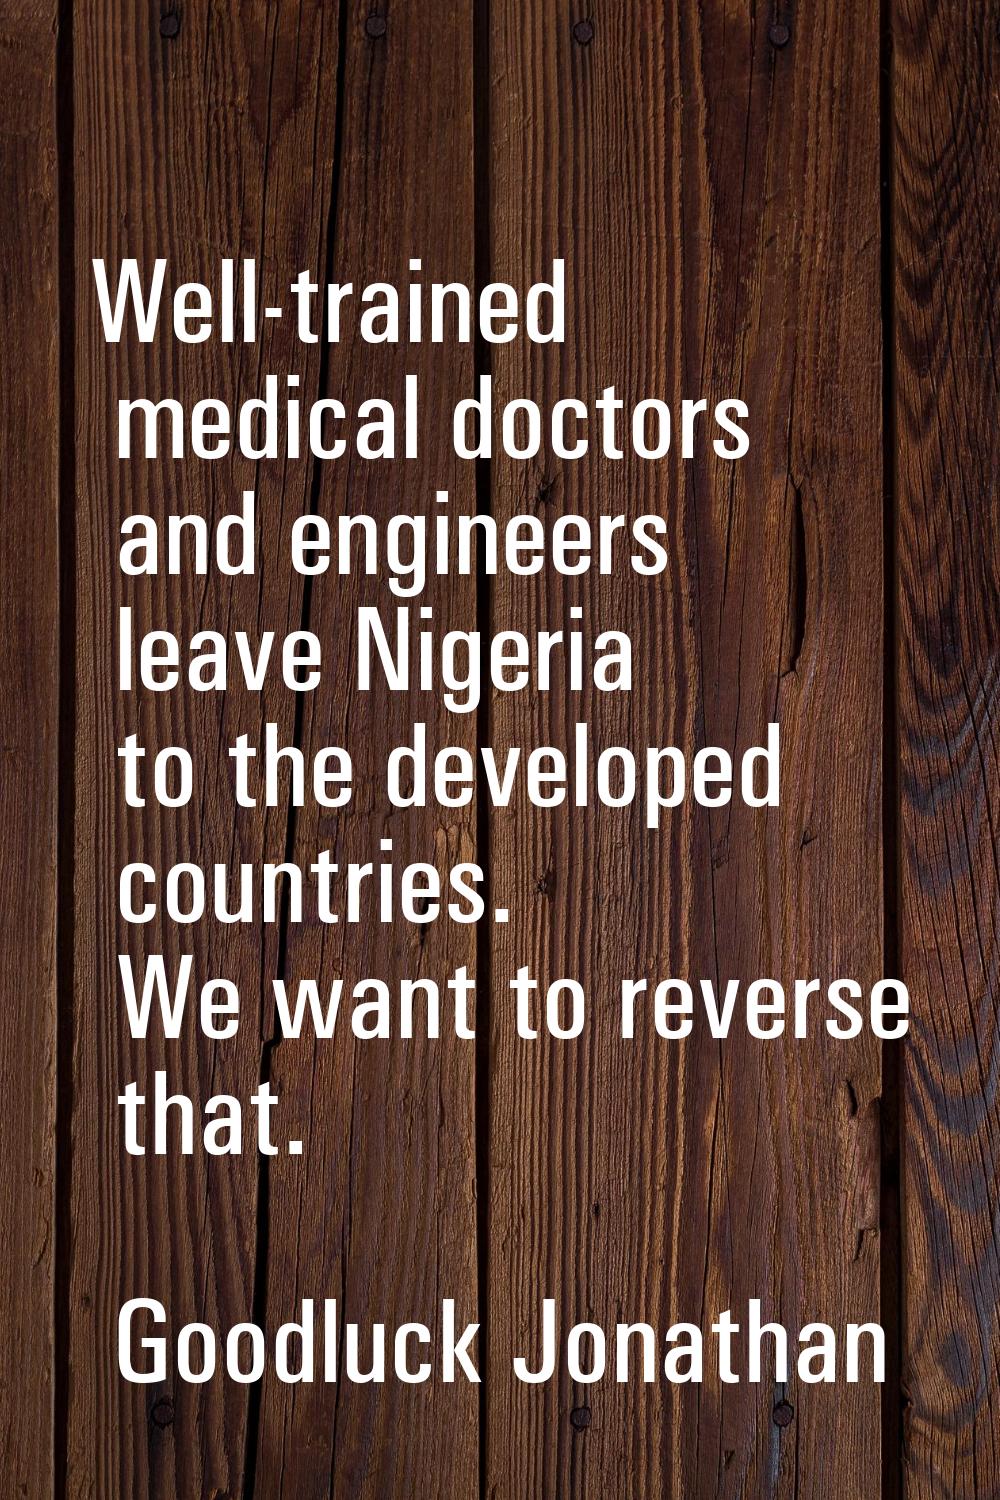 Well-trained medical doctors and engineers leave Nigeria to the developed countries. We want to rev